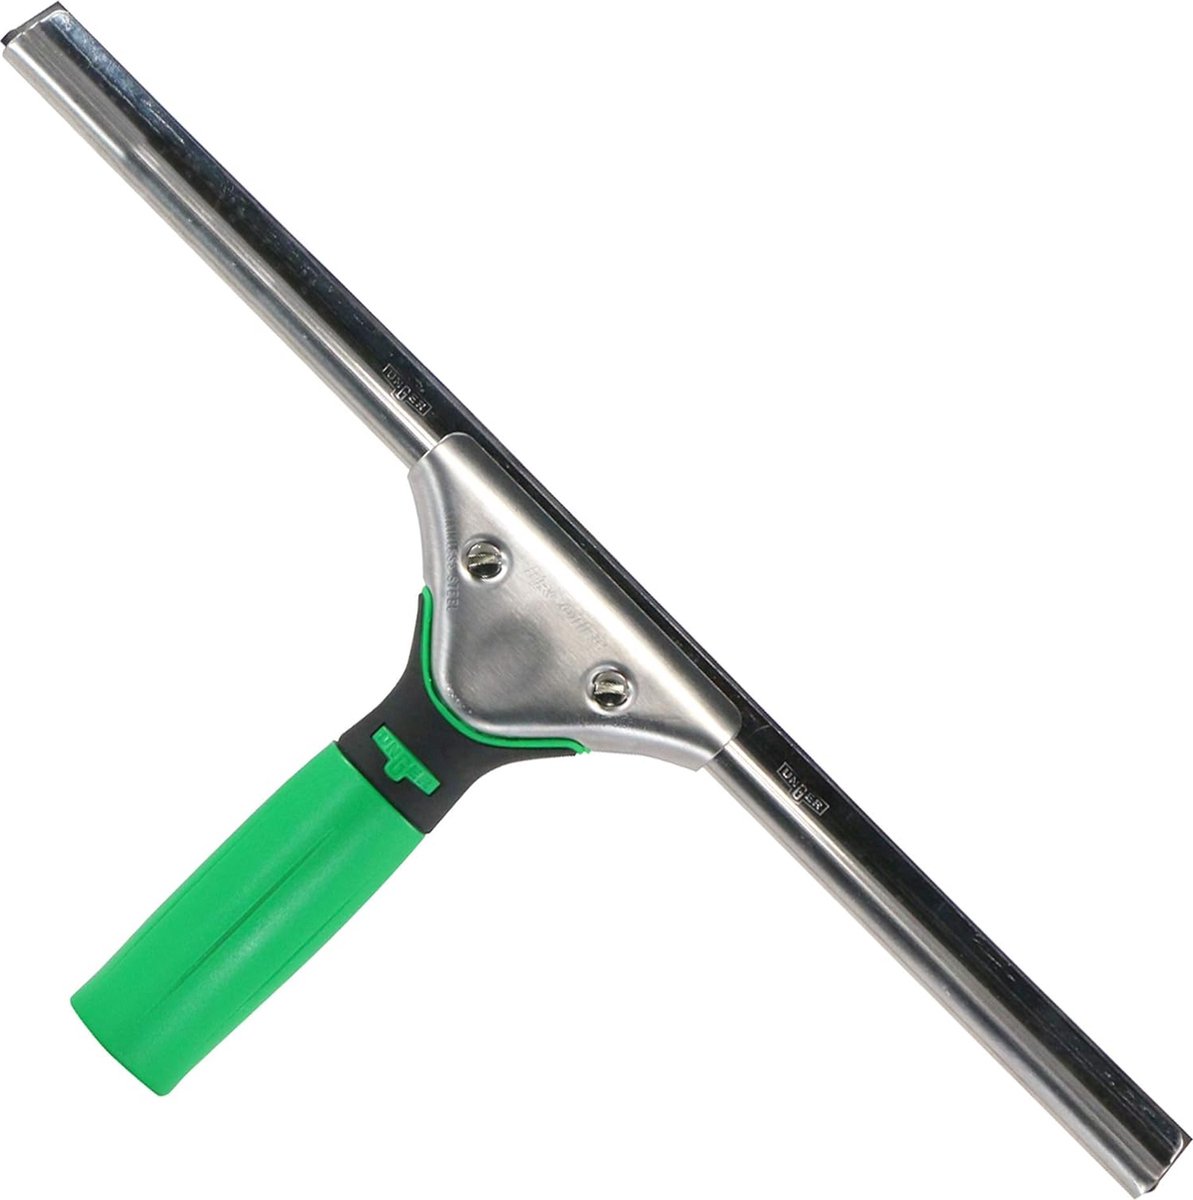 Unger ErgoTec 79001 Window Squeegee, 45 cm, Rubber Squeegee, Stainless Steel Channel & Rubber Handle - Window Cleaning Equipment - 